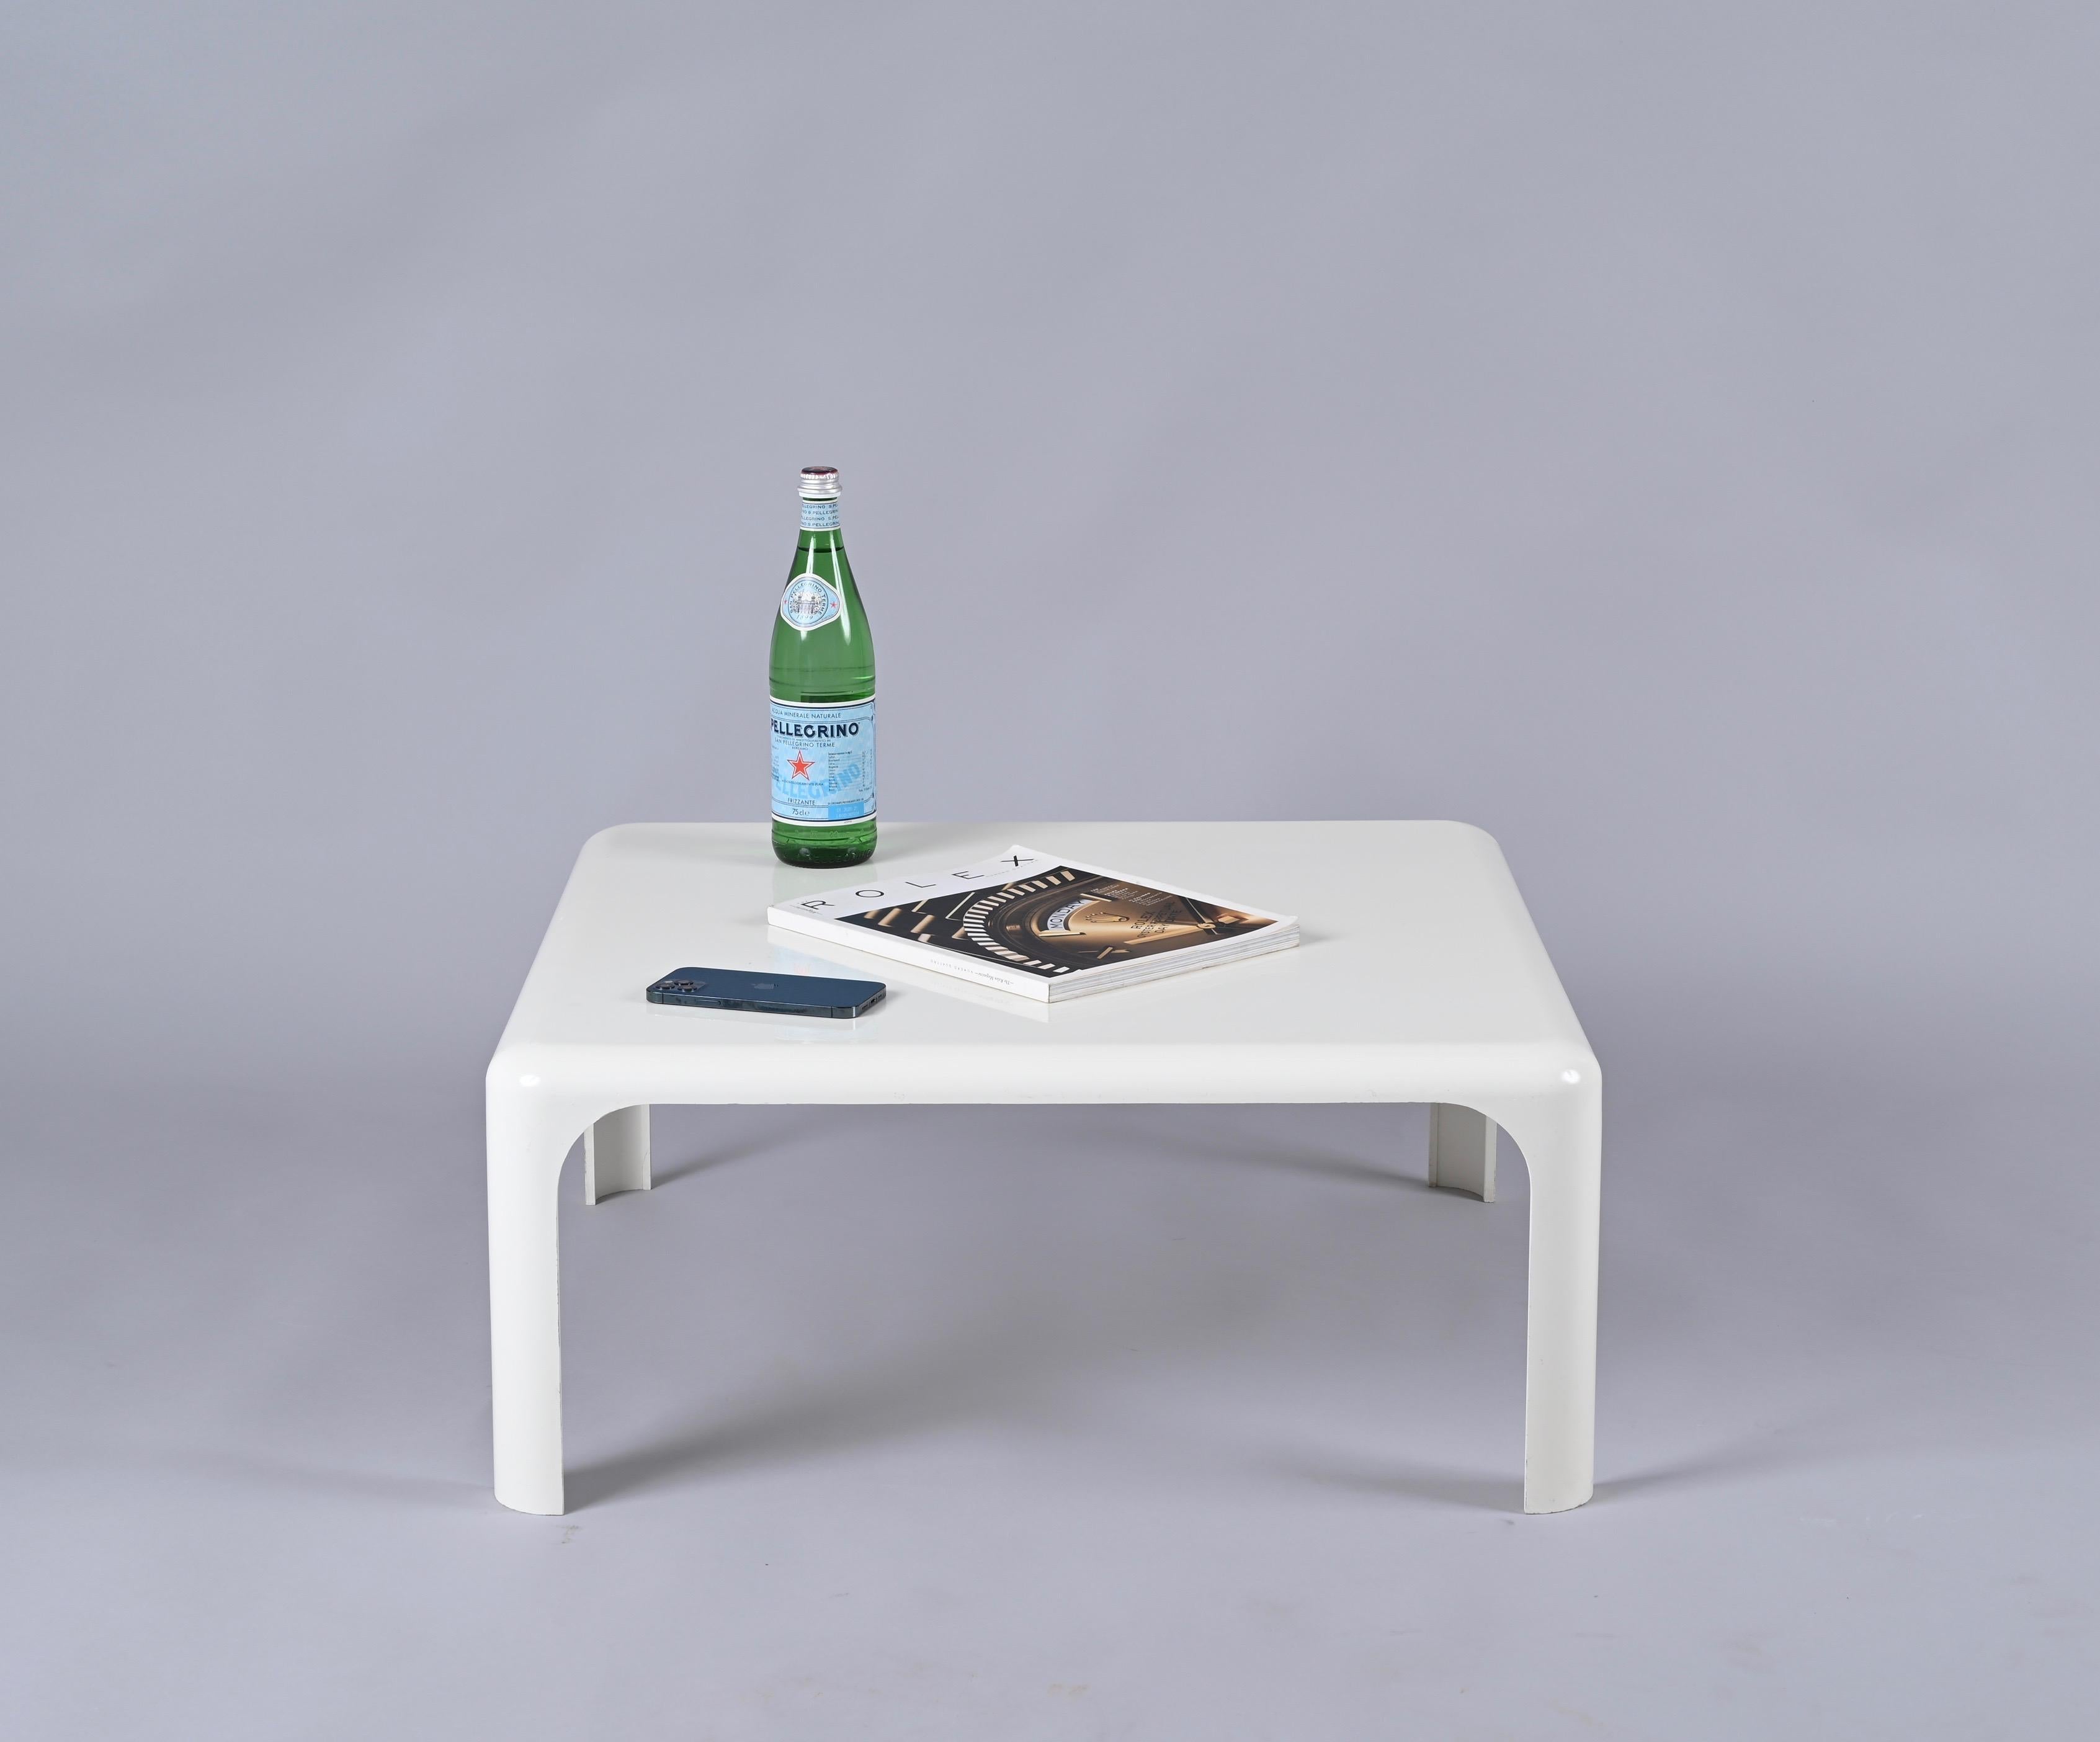 Stunning white Demetrio 70 coffee table designed by Vico Magiatretti for Studio Artemide in Italy in the 1960s.

The Demetrio 70 is a square coffee table fully made in fiberglass, making it light yet sturdy. 
The seamless appearance combined with